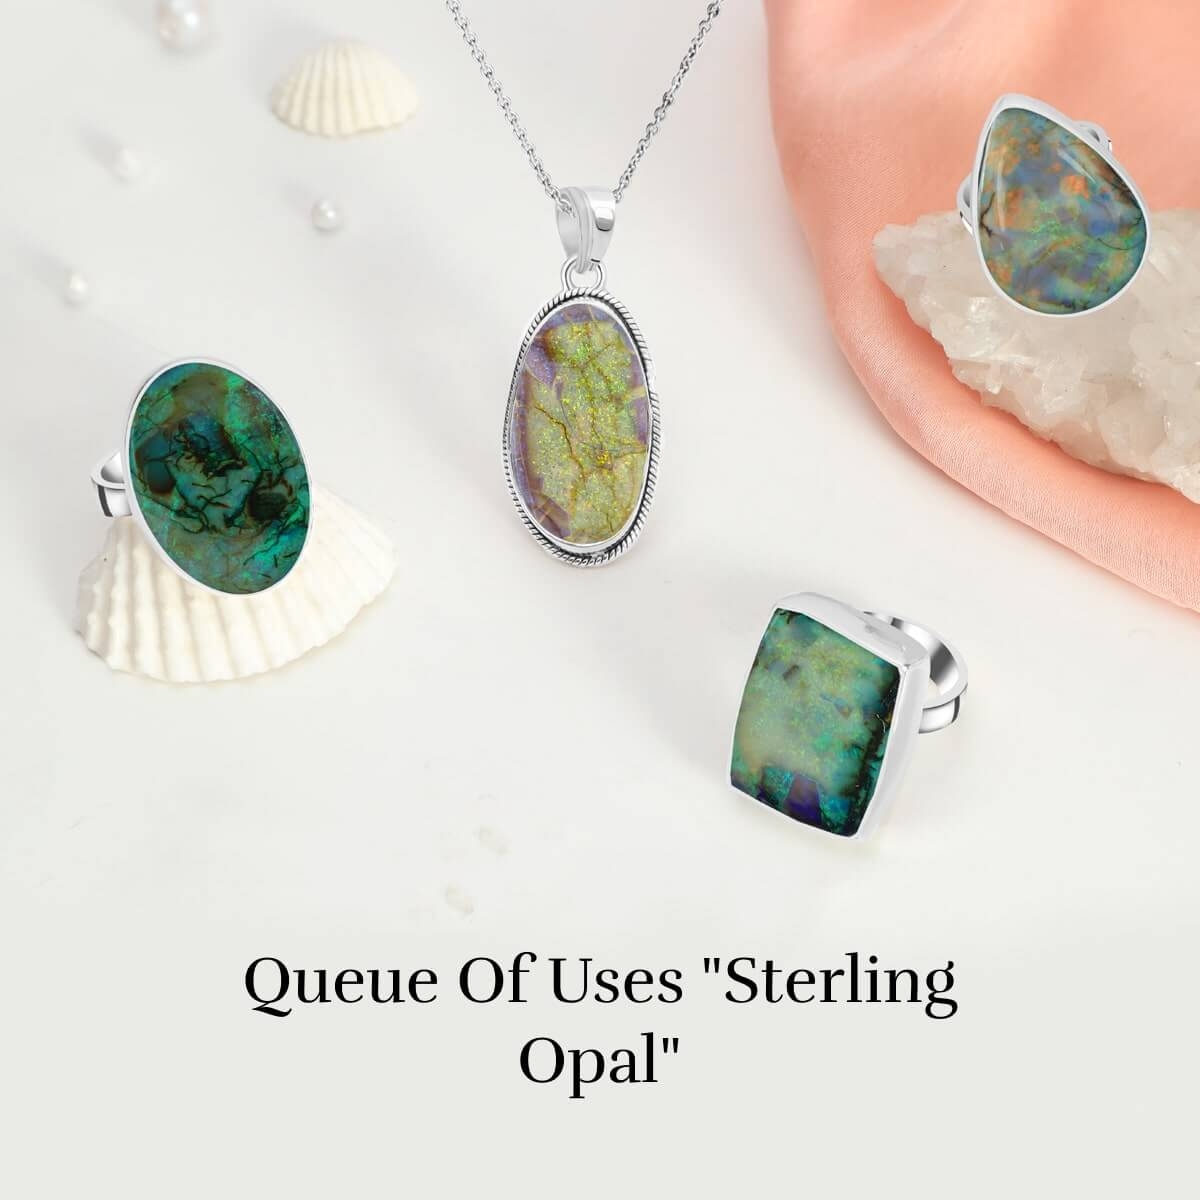 Uses of Sterling Opal